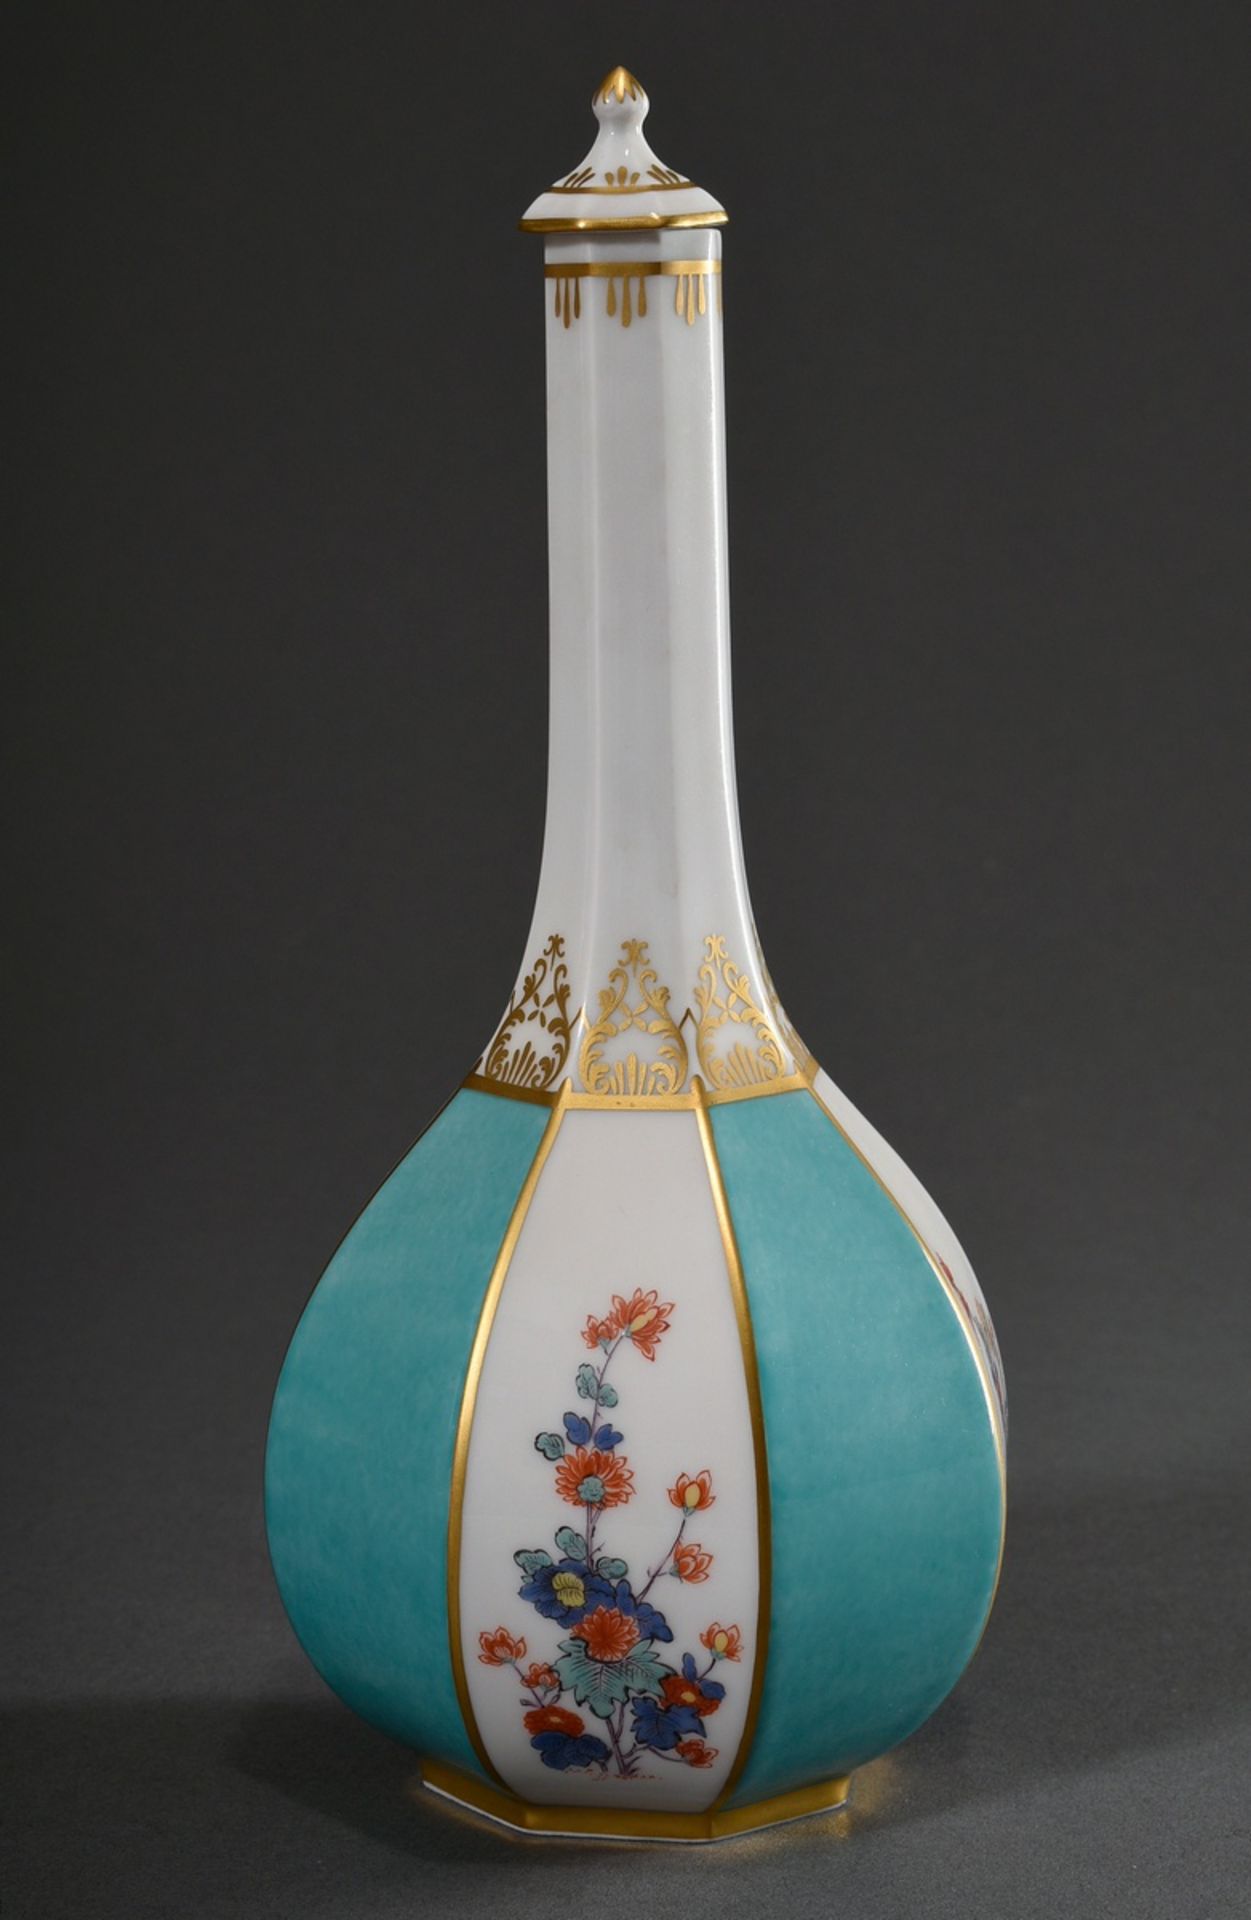 Meissen octagonal sake bottle after Asian model with polychrome Kakiemon decor and gold staffage on